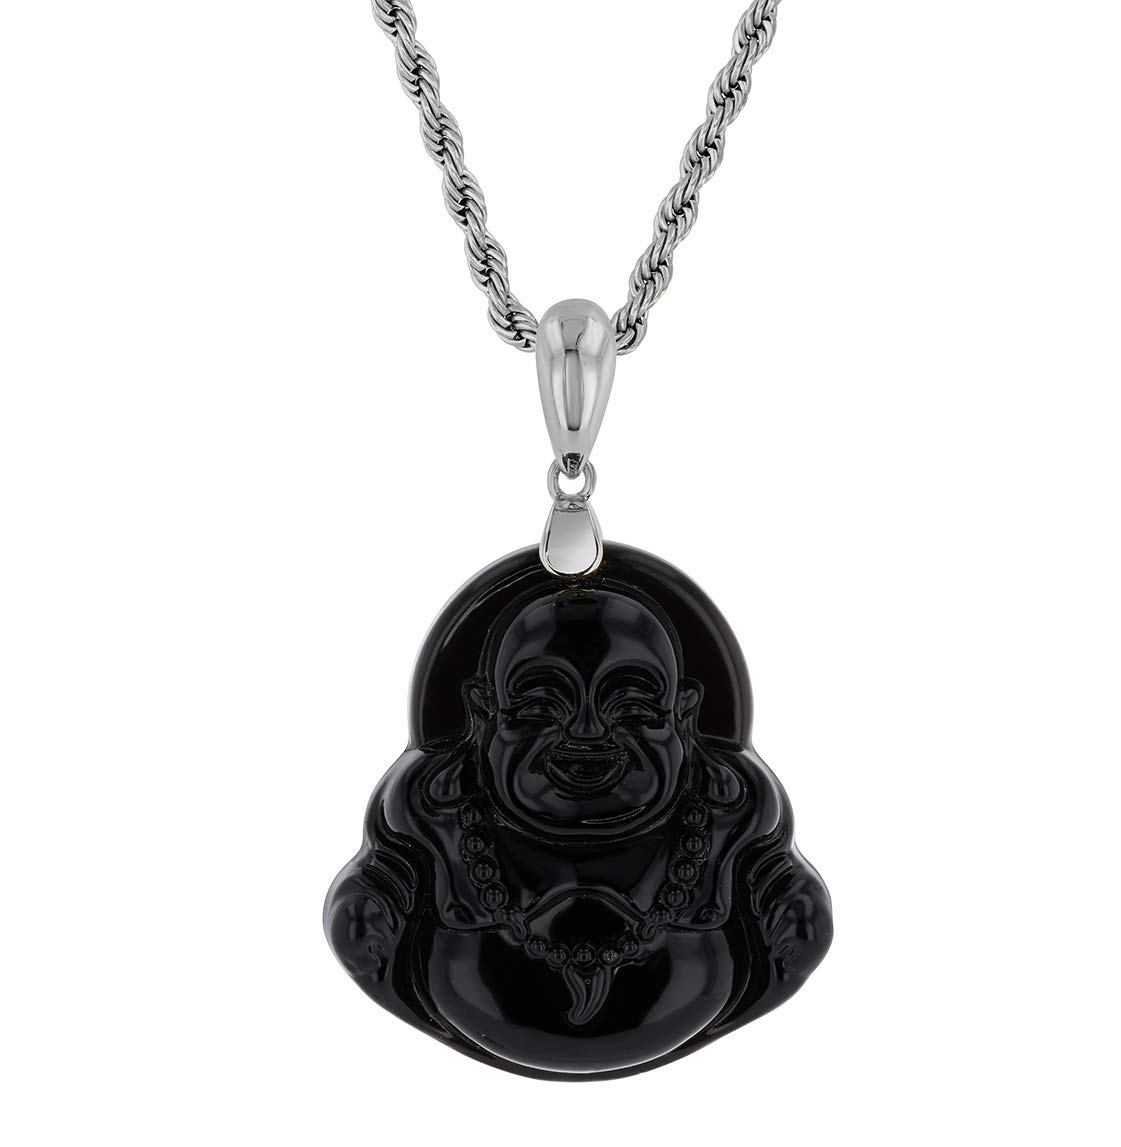 Laughing Buddha Black Jade Pendant Necklace Rope Chain Genuine Certified Grade A Jadeite Jade Hand Crafted, Jade Necklace, 14k White Gold Finish Silver Laughing Jade Buddha Necklace